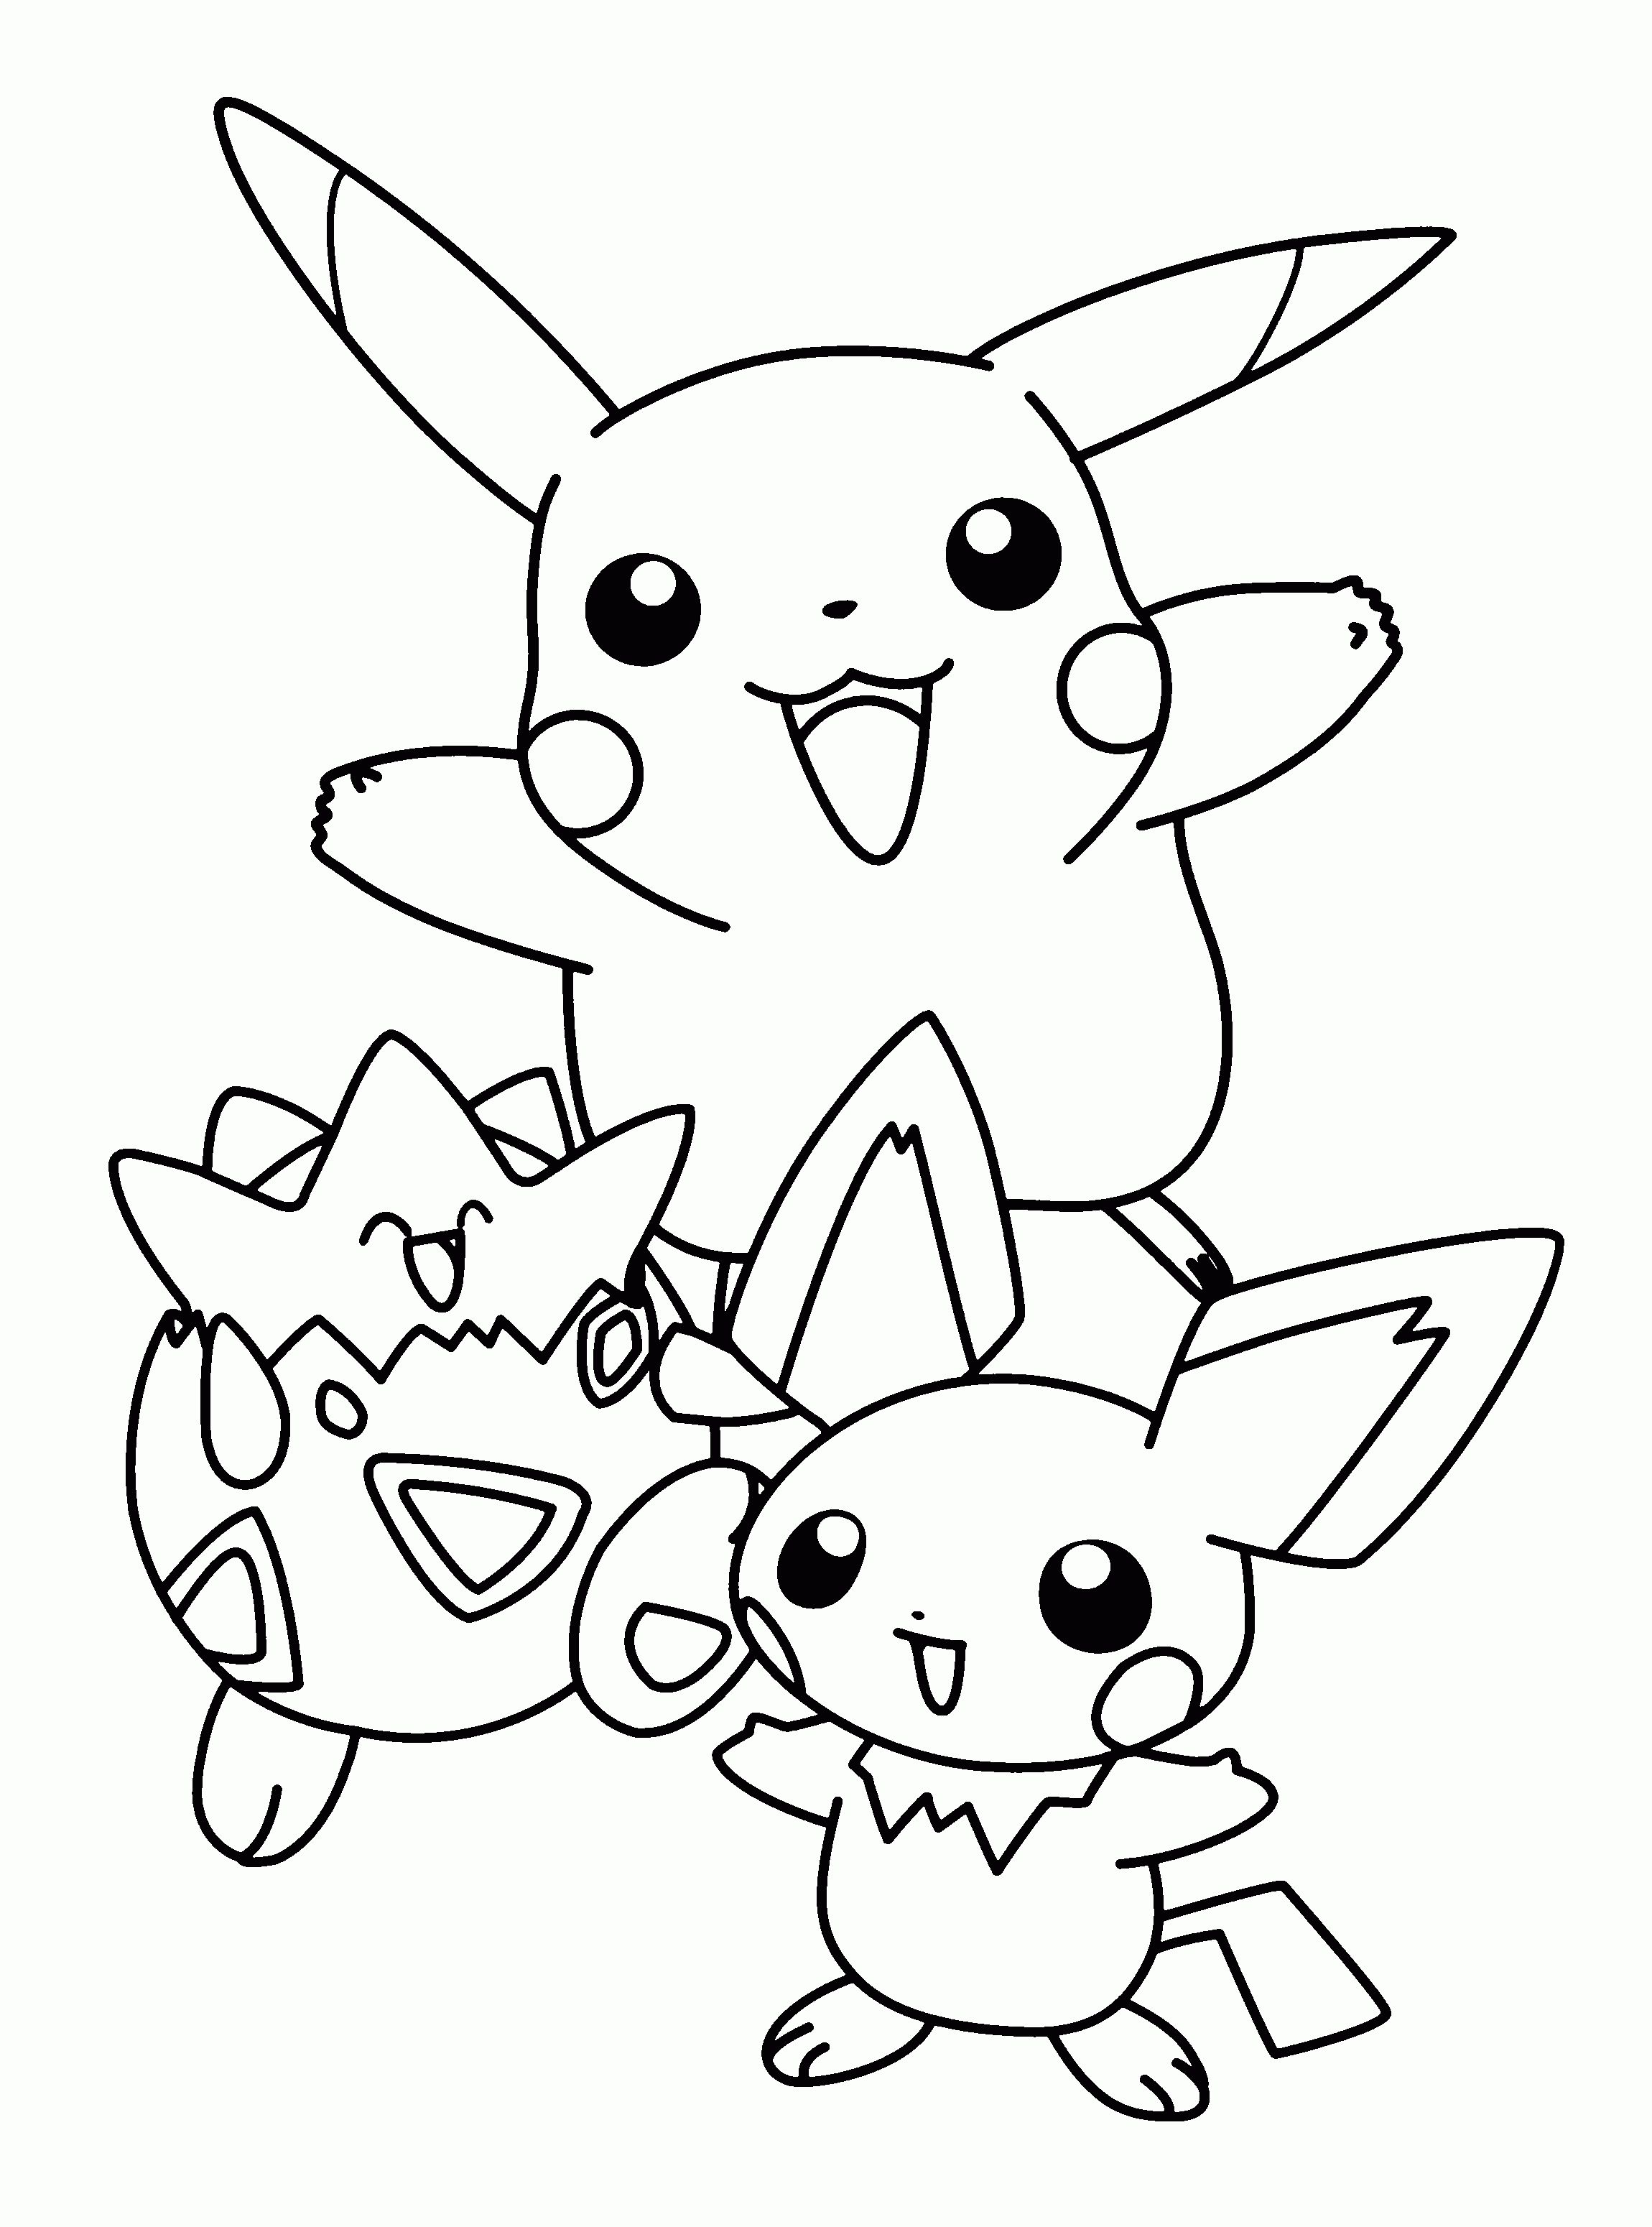 All Pokemon Coloring Pages Download And Print For Free | Cats To - Free Printable Pokemon Coloring Pages